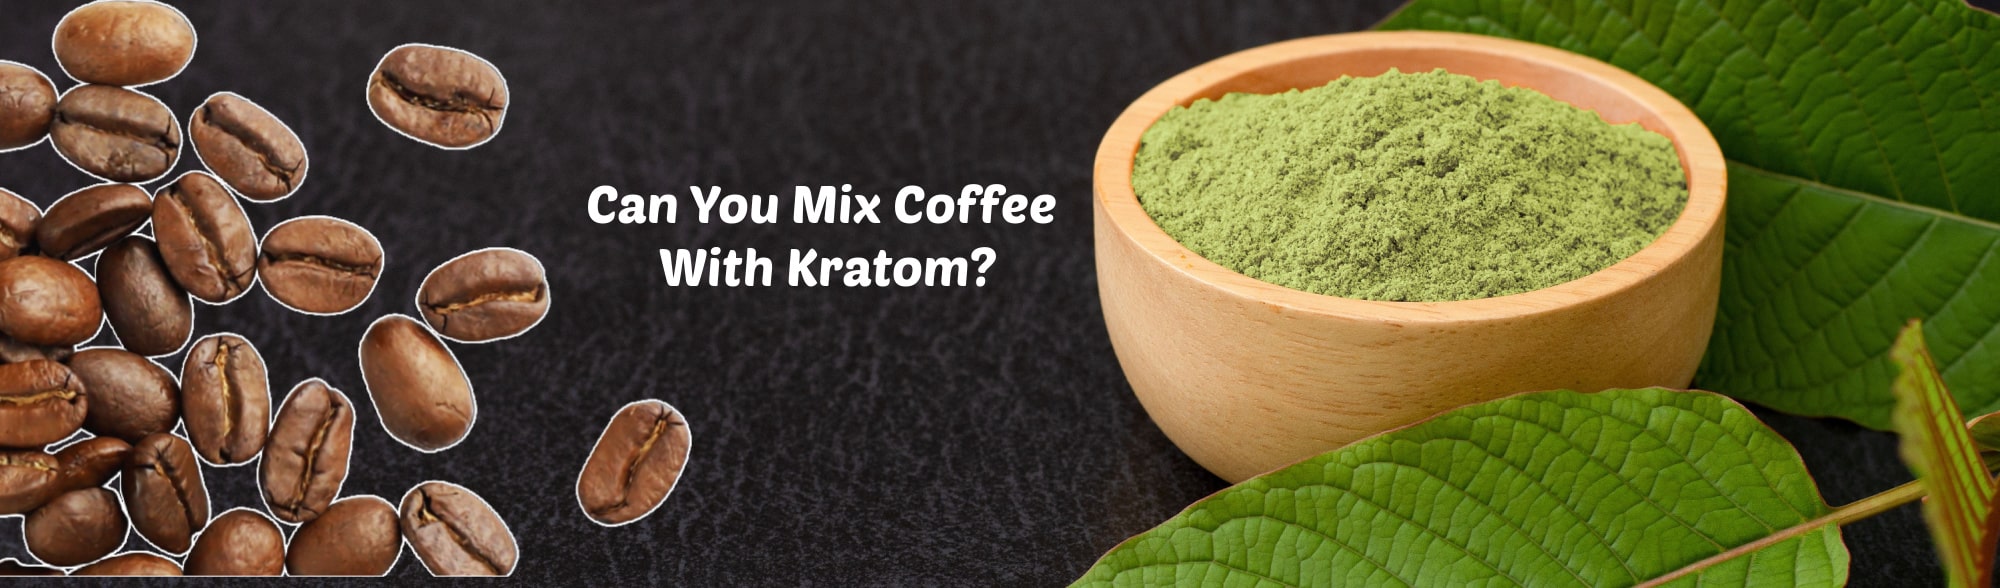 image of can you mix coffee with kratom